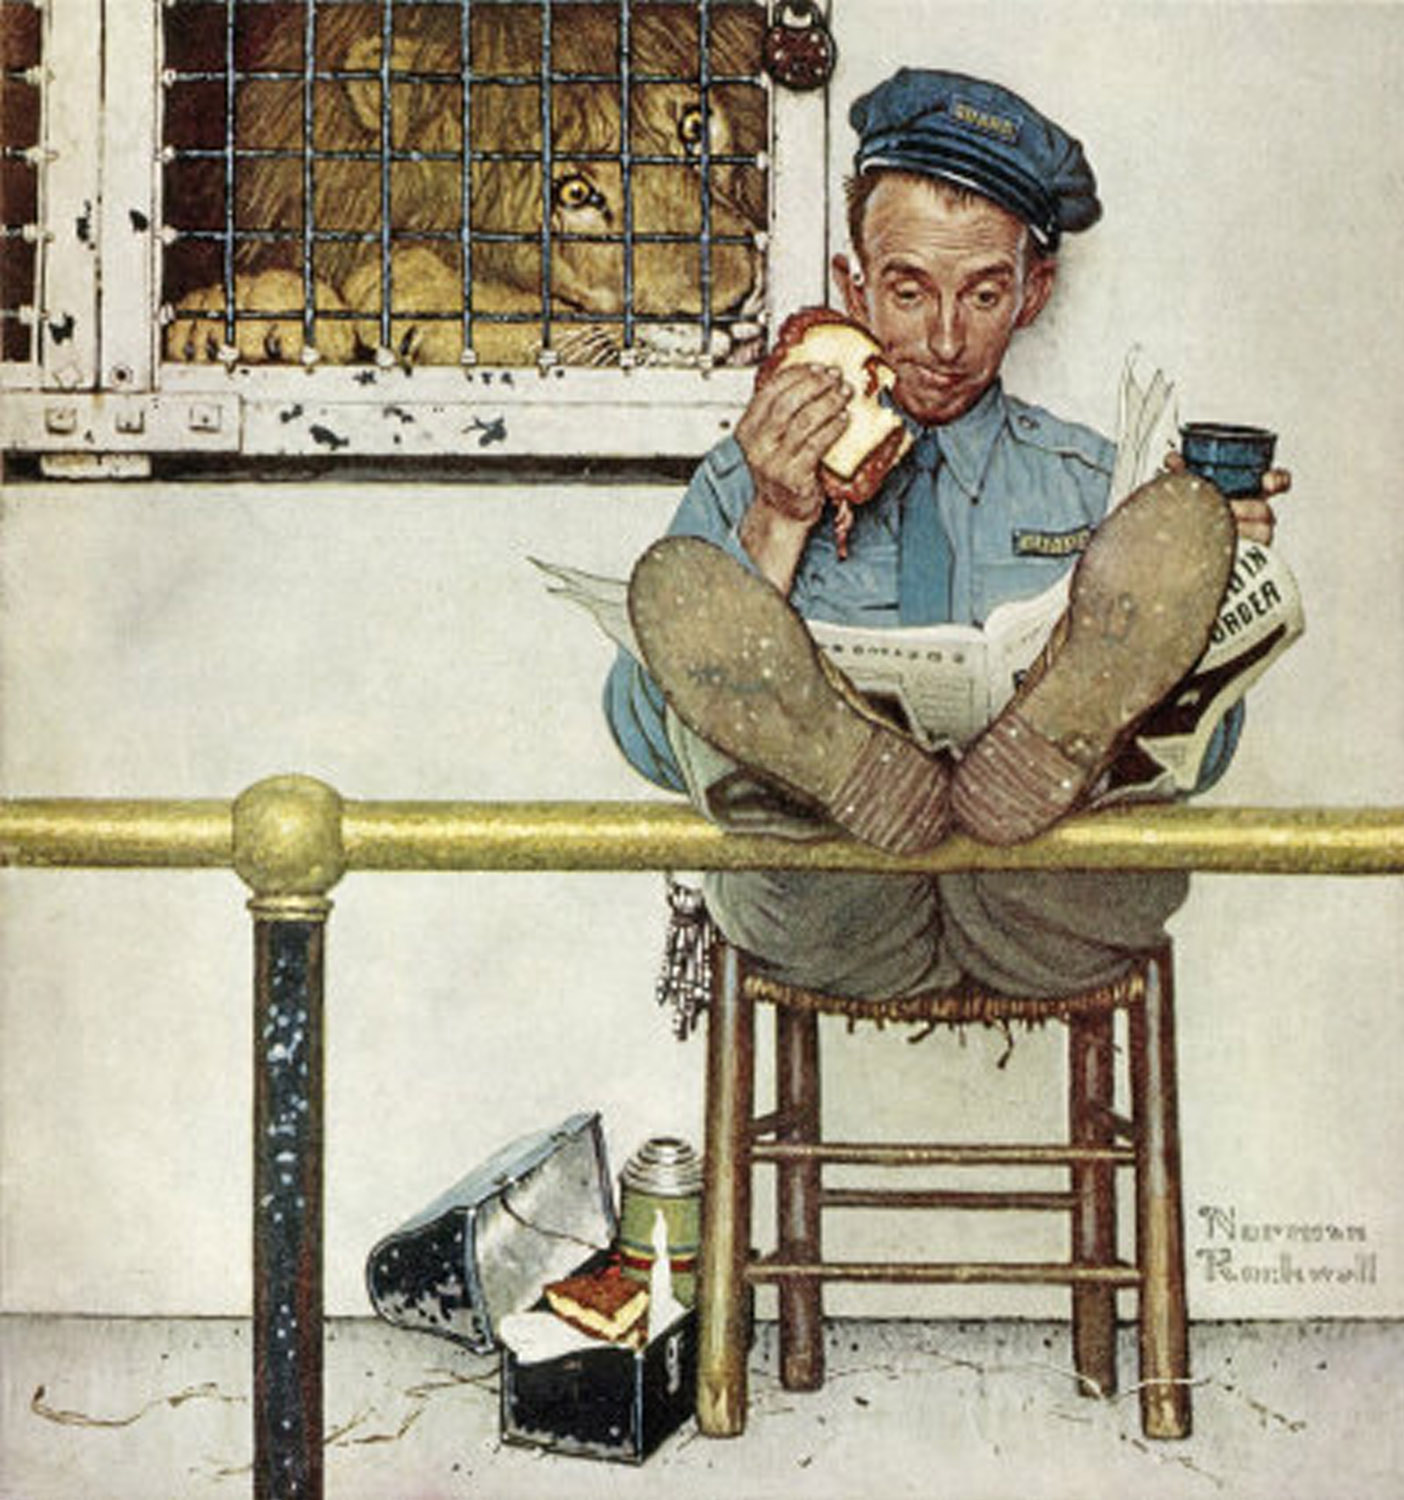 Norman Rockwell food illustration, Norman Rockwell food advertising illustration, Norman Rockwell editorial food illustration, american food Norman Rockwell illustration, hand food illustration norman rockwell, zoo, lunch